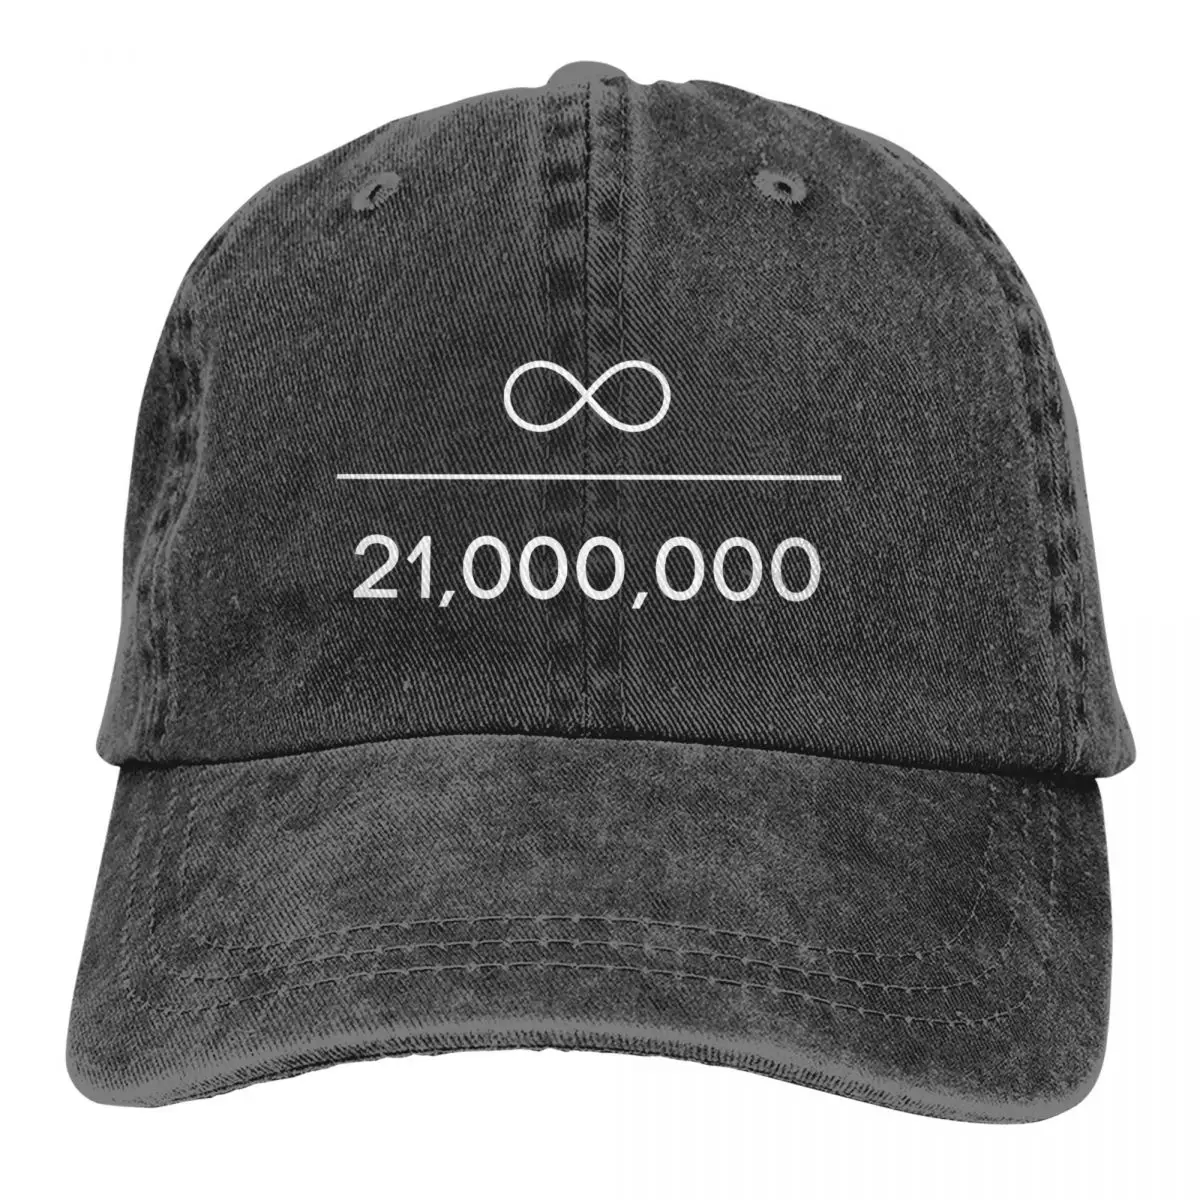 

Washed Men's Baseball Cap Infinity Divided By 21 Million Trucker Snapback Caps Dad Hat Bitcoin Cryptocurrency Miners Golf Hats